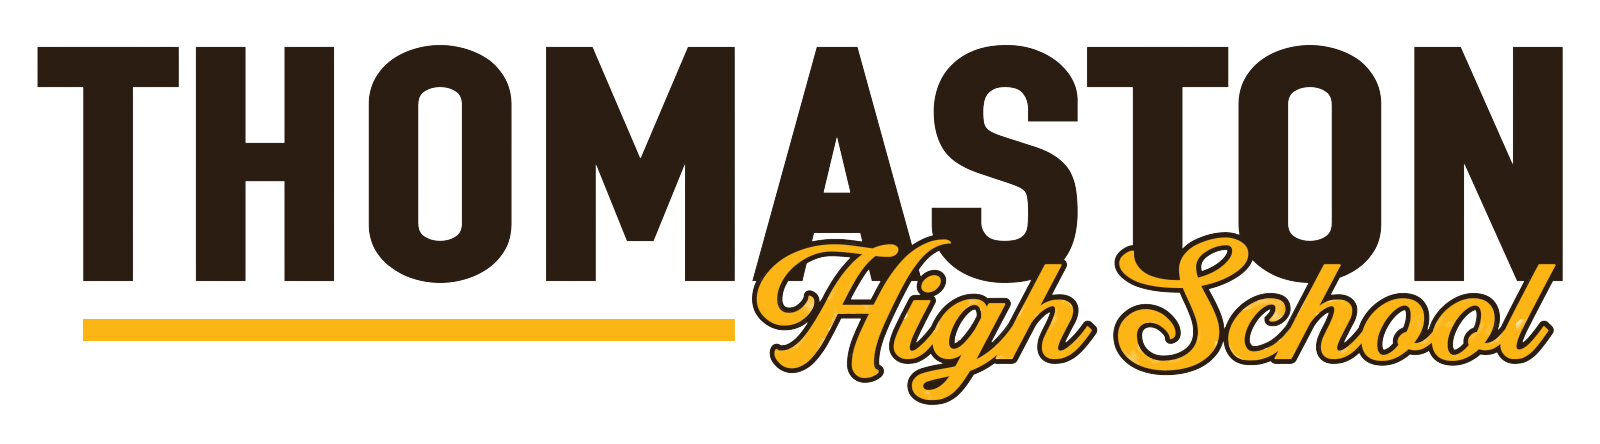 the logo for thomaston high school is black and yellow .